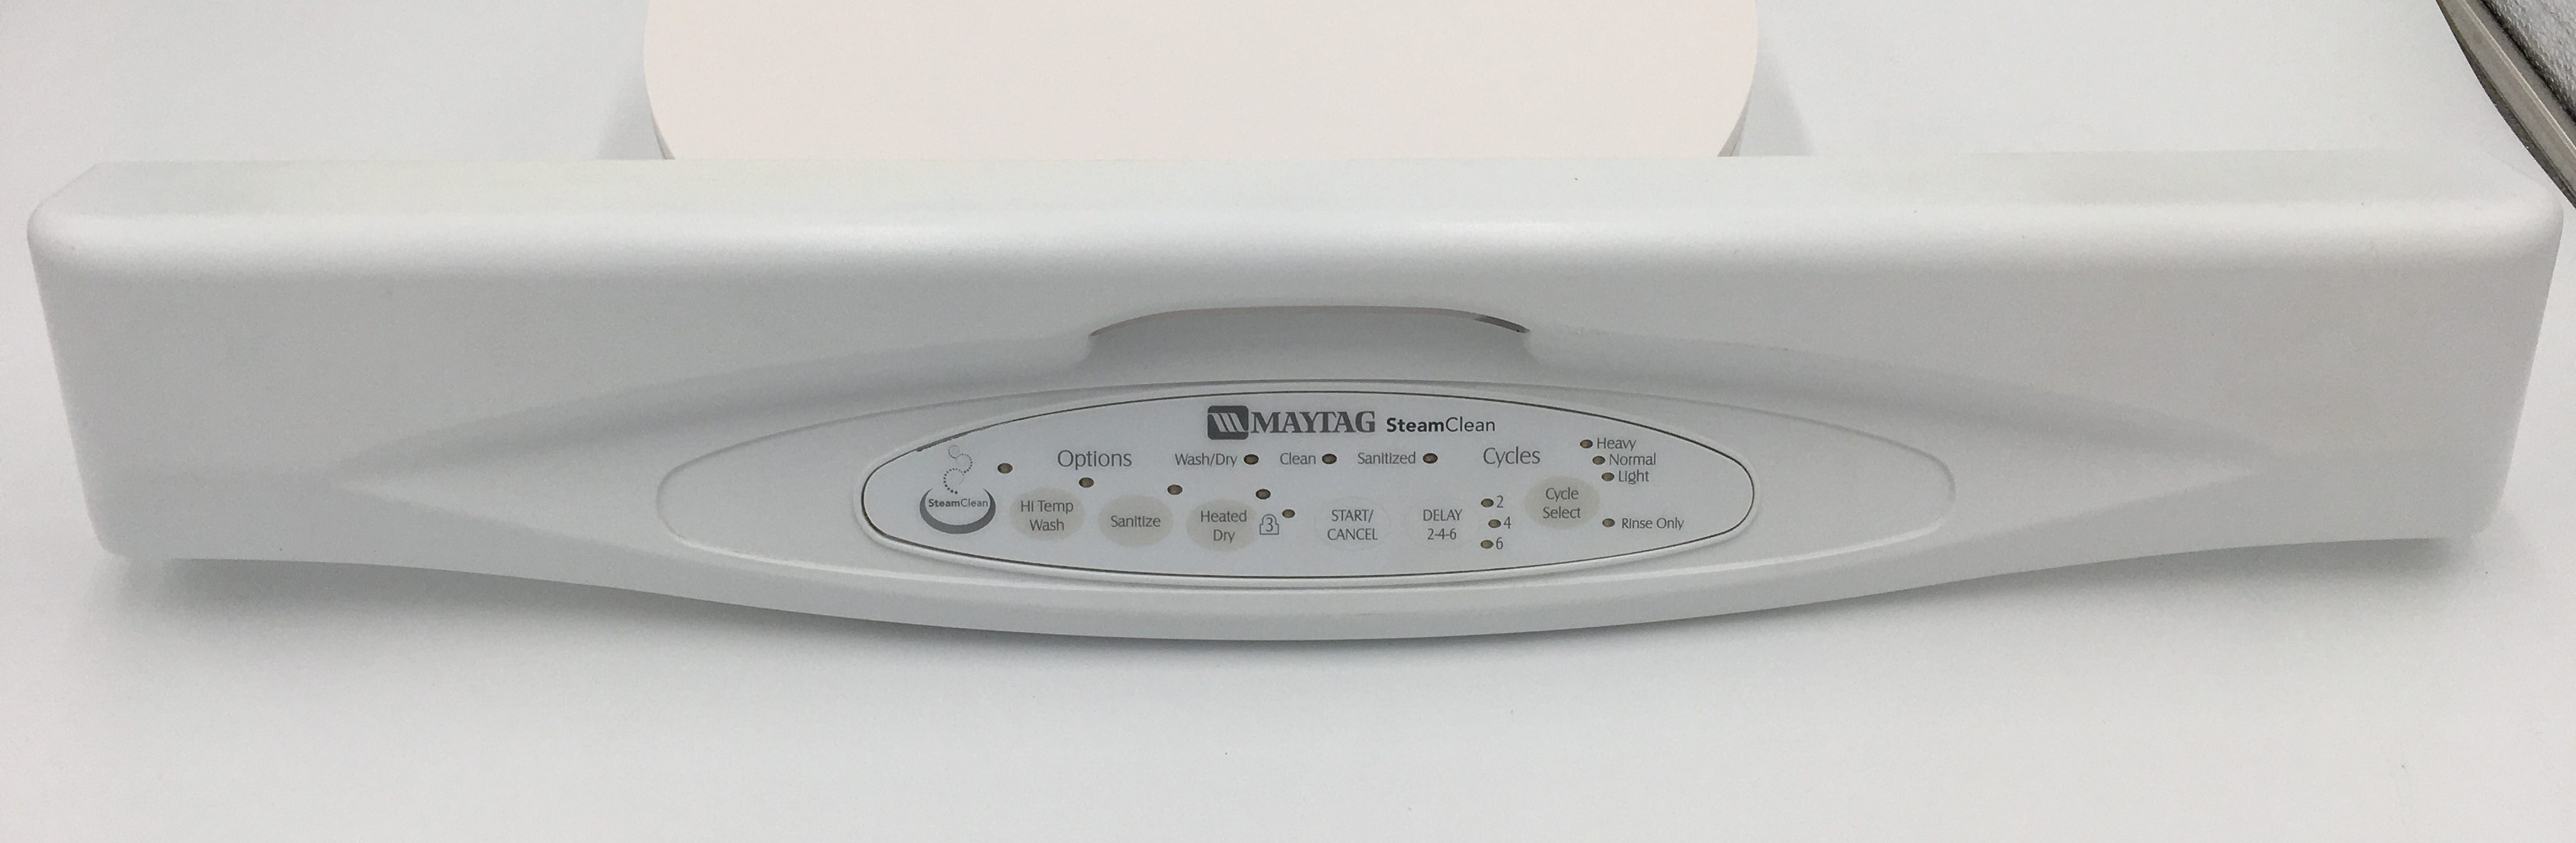 Maytag by Whirlpool Touchpad and Control Panel Black 6919829 eBay